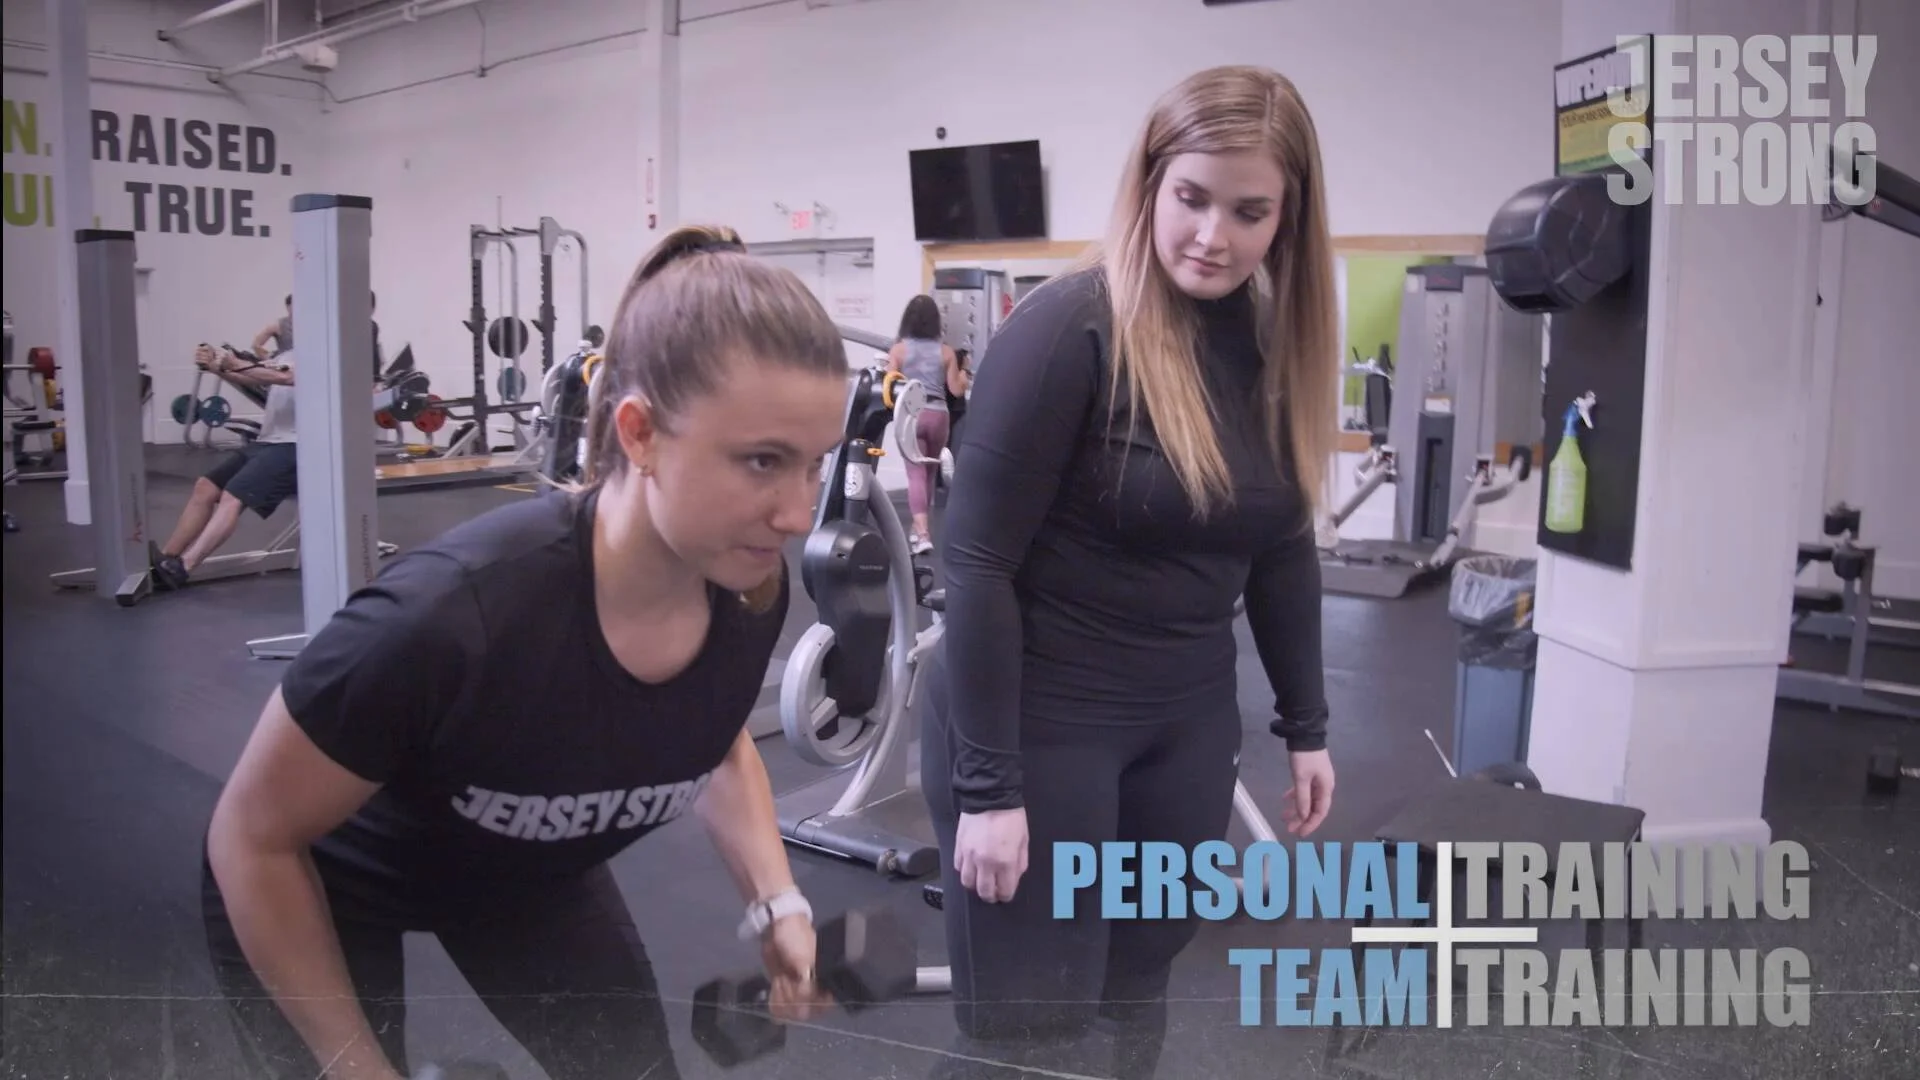 jersey strong personal training cost